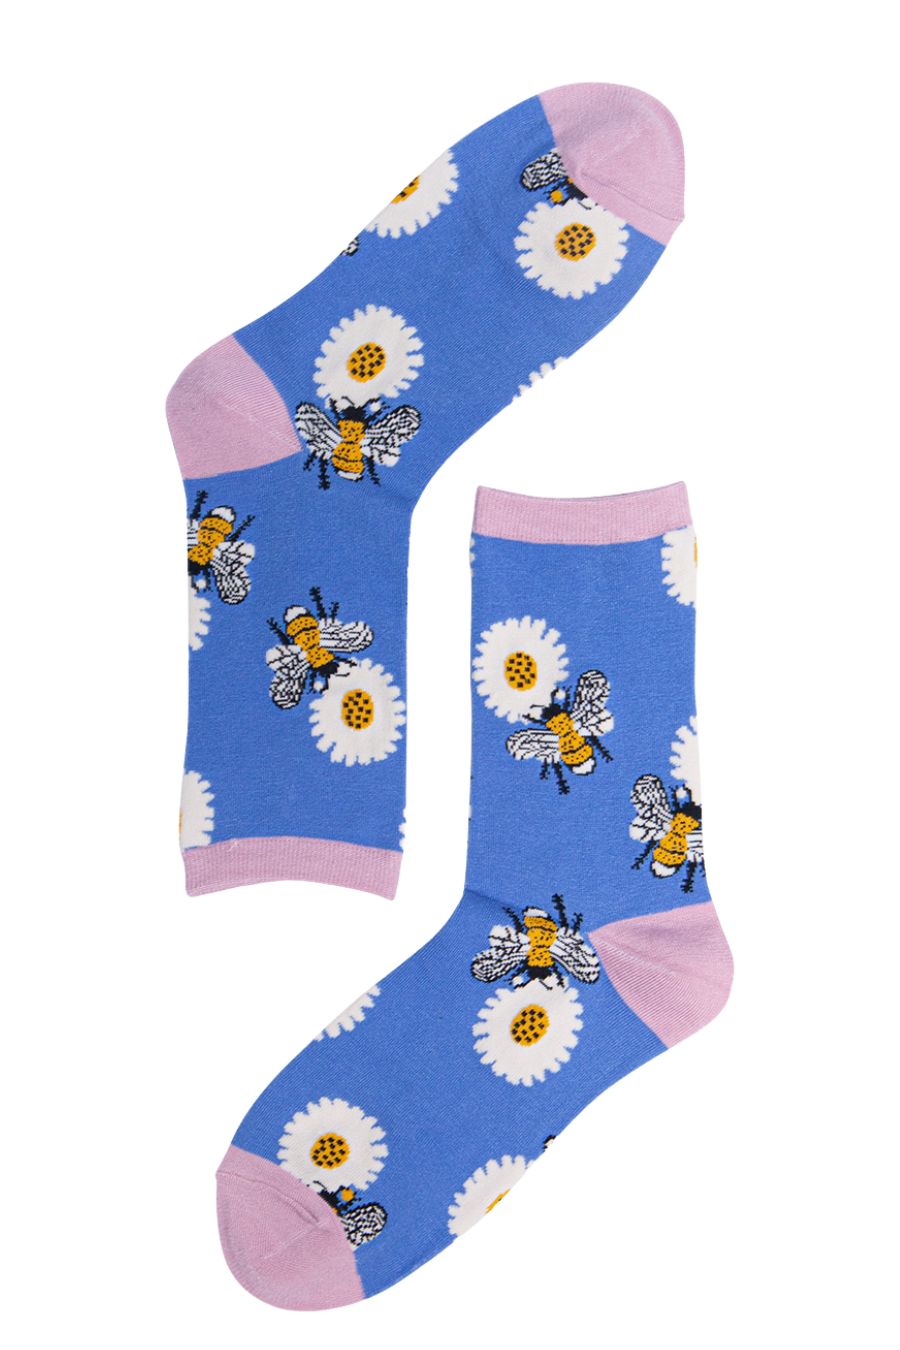 blue, pink ankle socks with bees and daisies